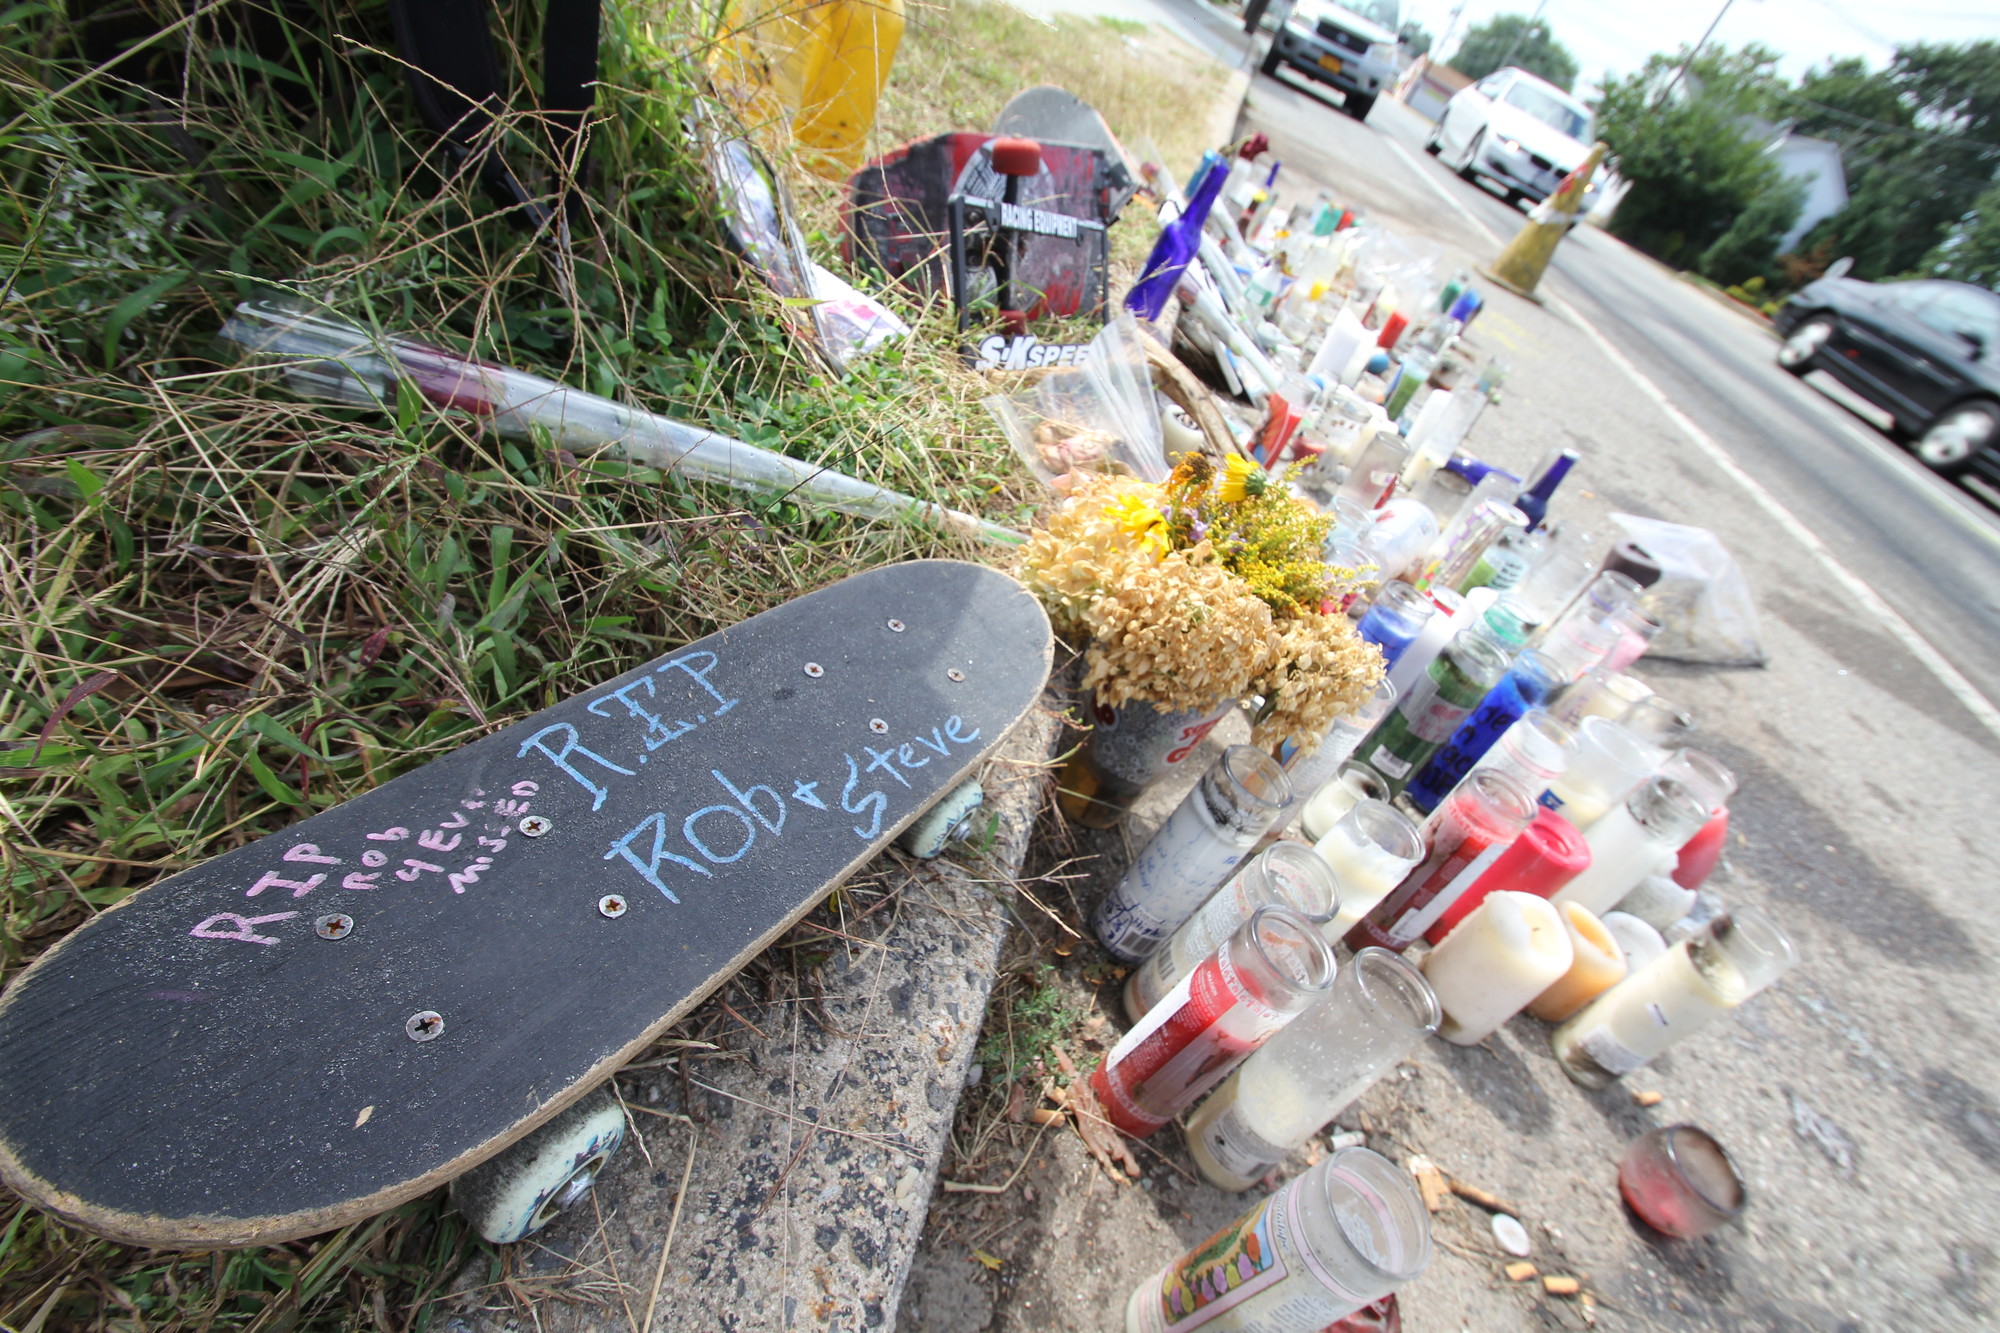 Scores of items have been placed on North Jerusalem Road, near Roxboro Court, in memory of Robert Treimanis, 19, and Stephen Clark, 20, who died last week.